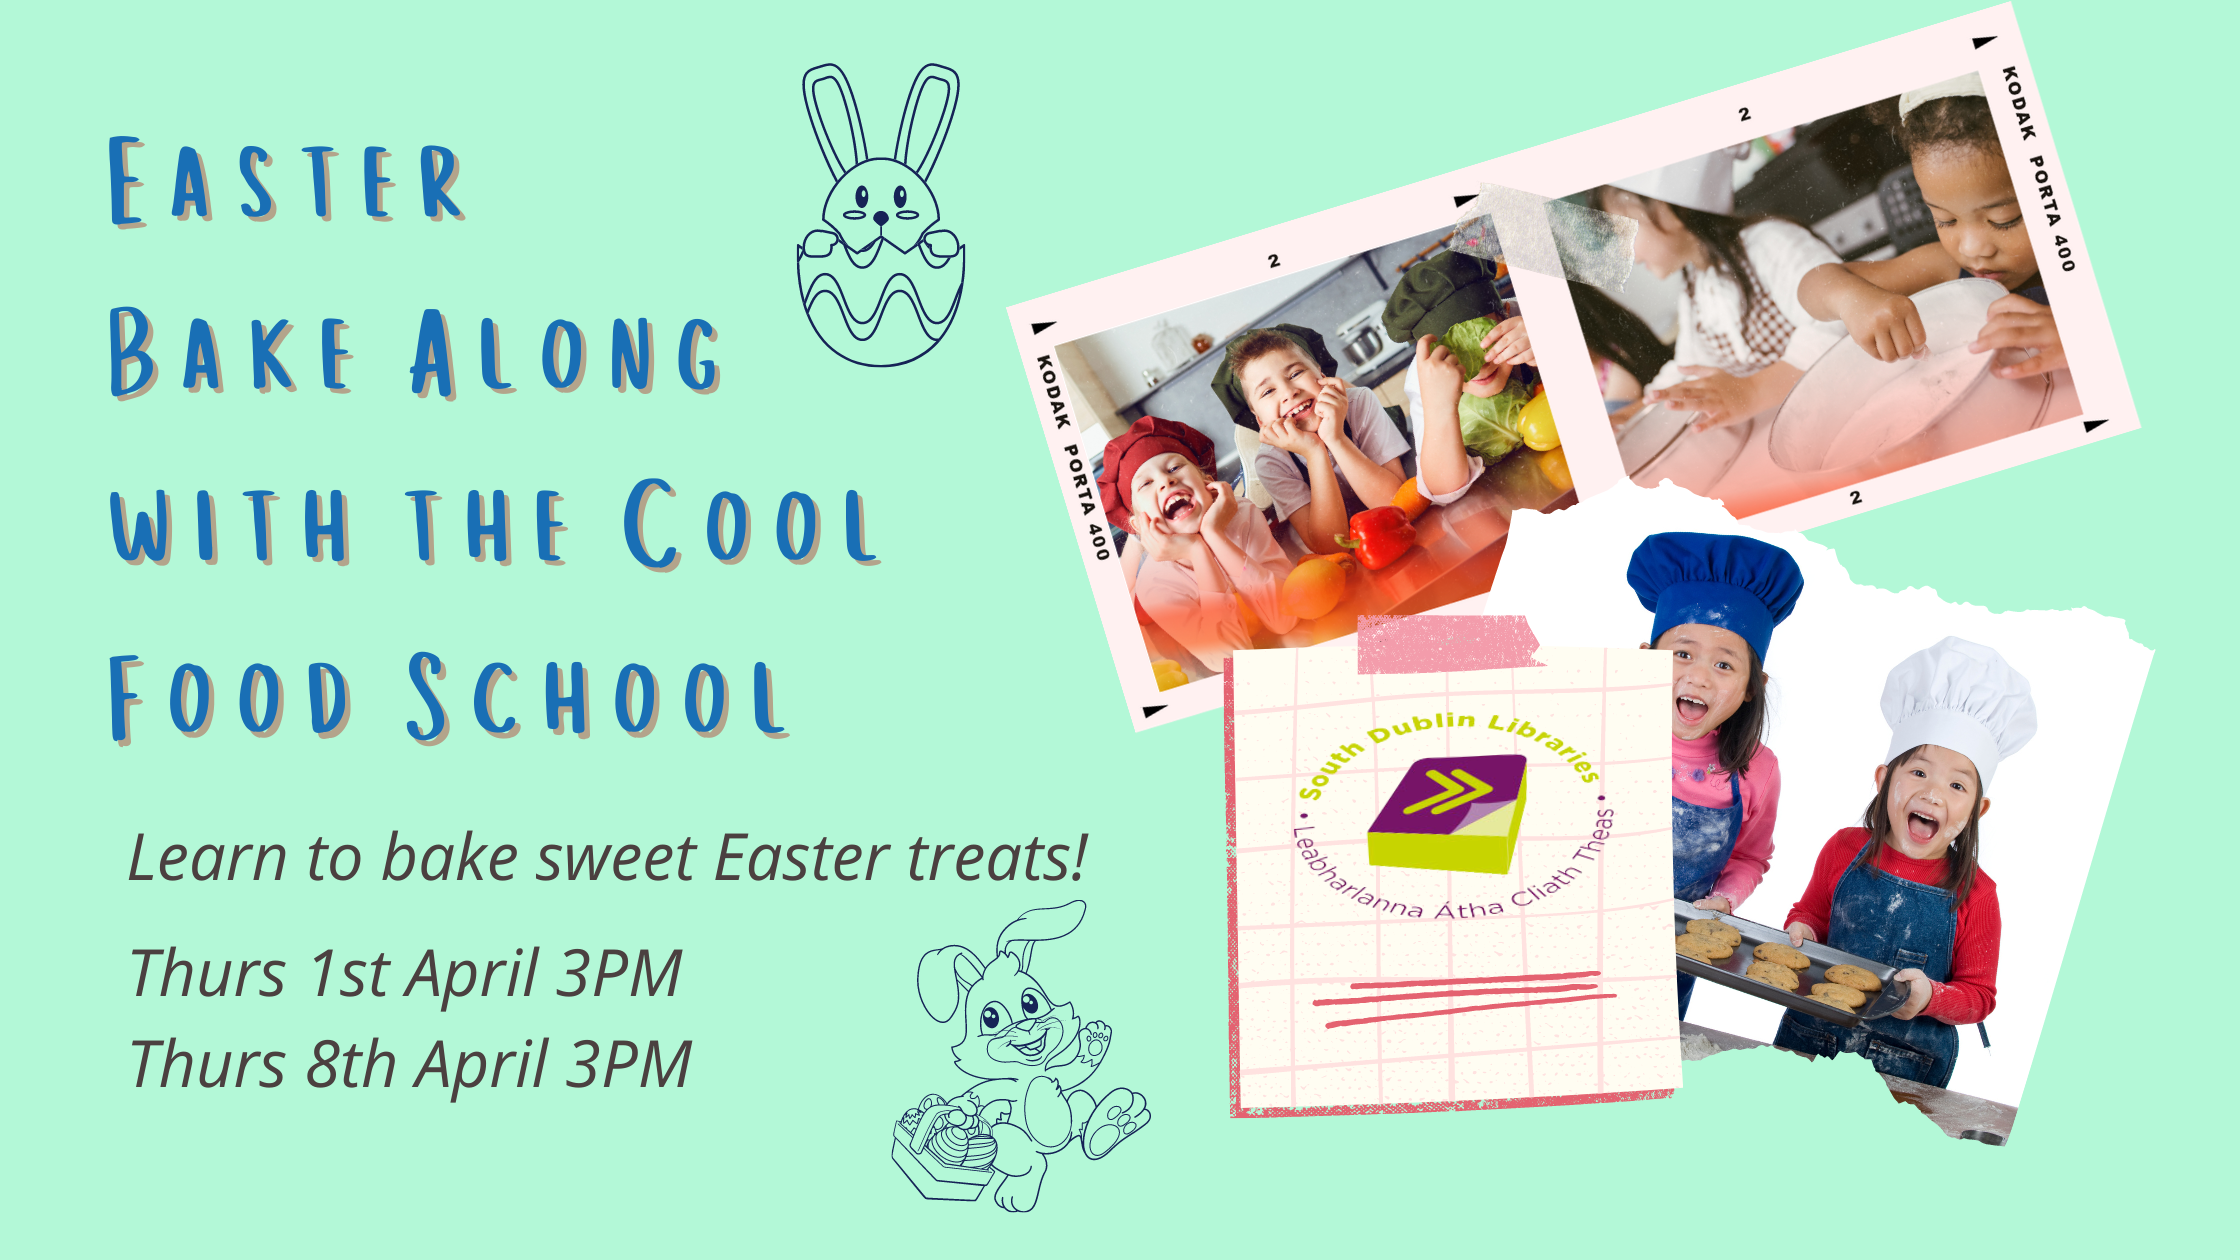 Easter Bake Along with The Cool Food School sumamry image